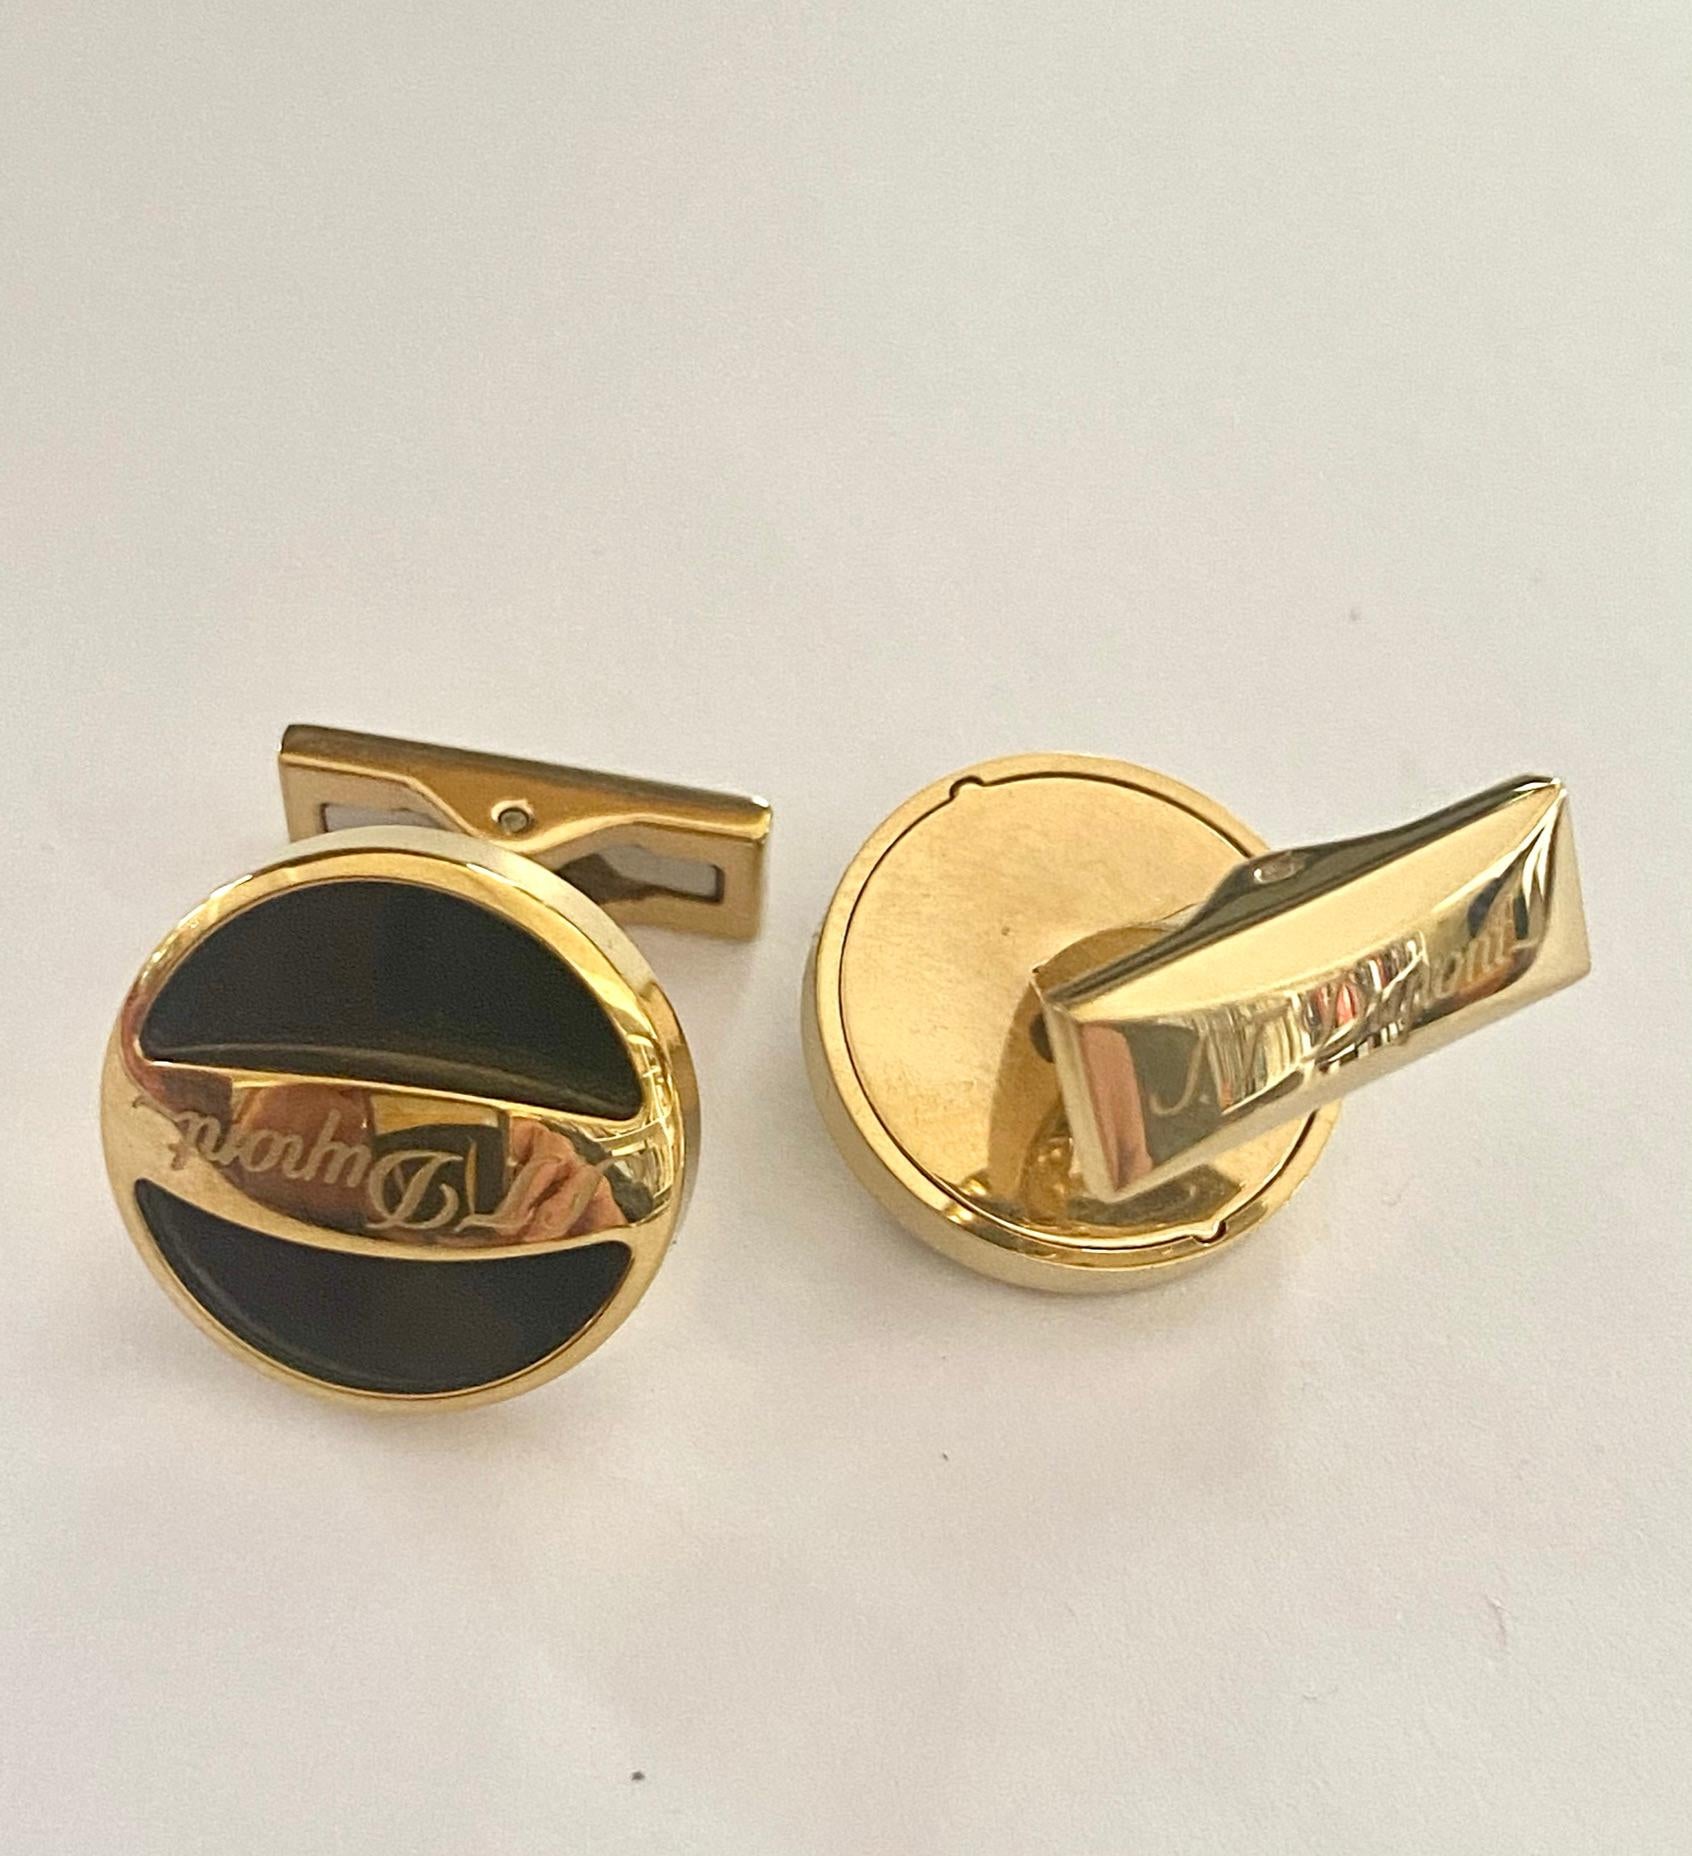 A pair of gold plated cufflinks.
Brand: S.T. Dupont Paris.
round model with black background, signed twice.
product no; 005791
diameter 18 mm.
height 6 mm.
distance between front and back total: 24 mm.
Weight: 18.69 grams
N.O.S. new old stock.
Comes